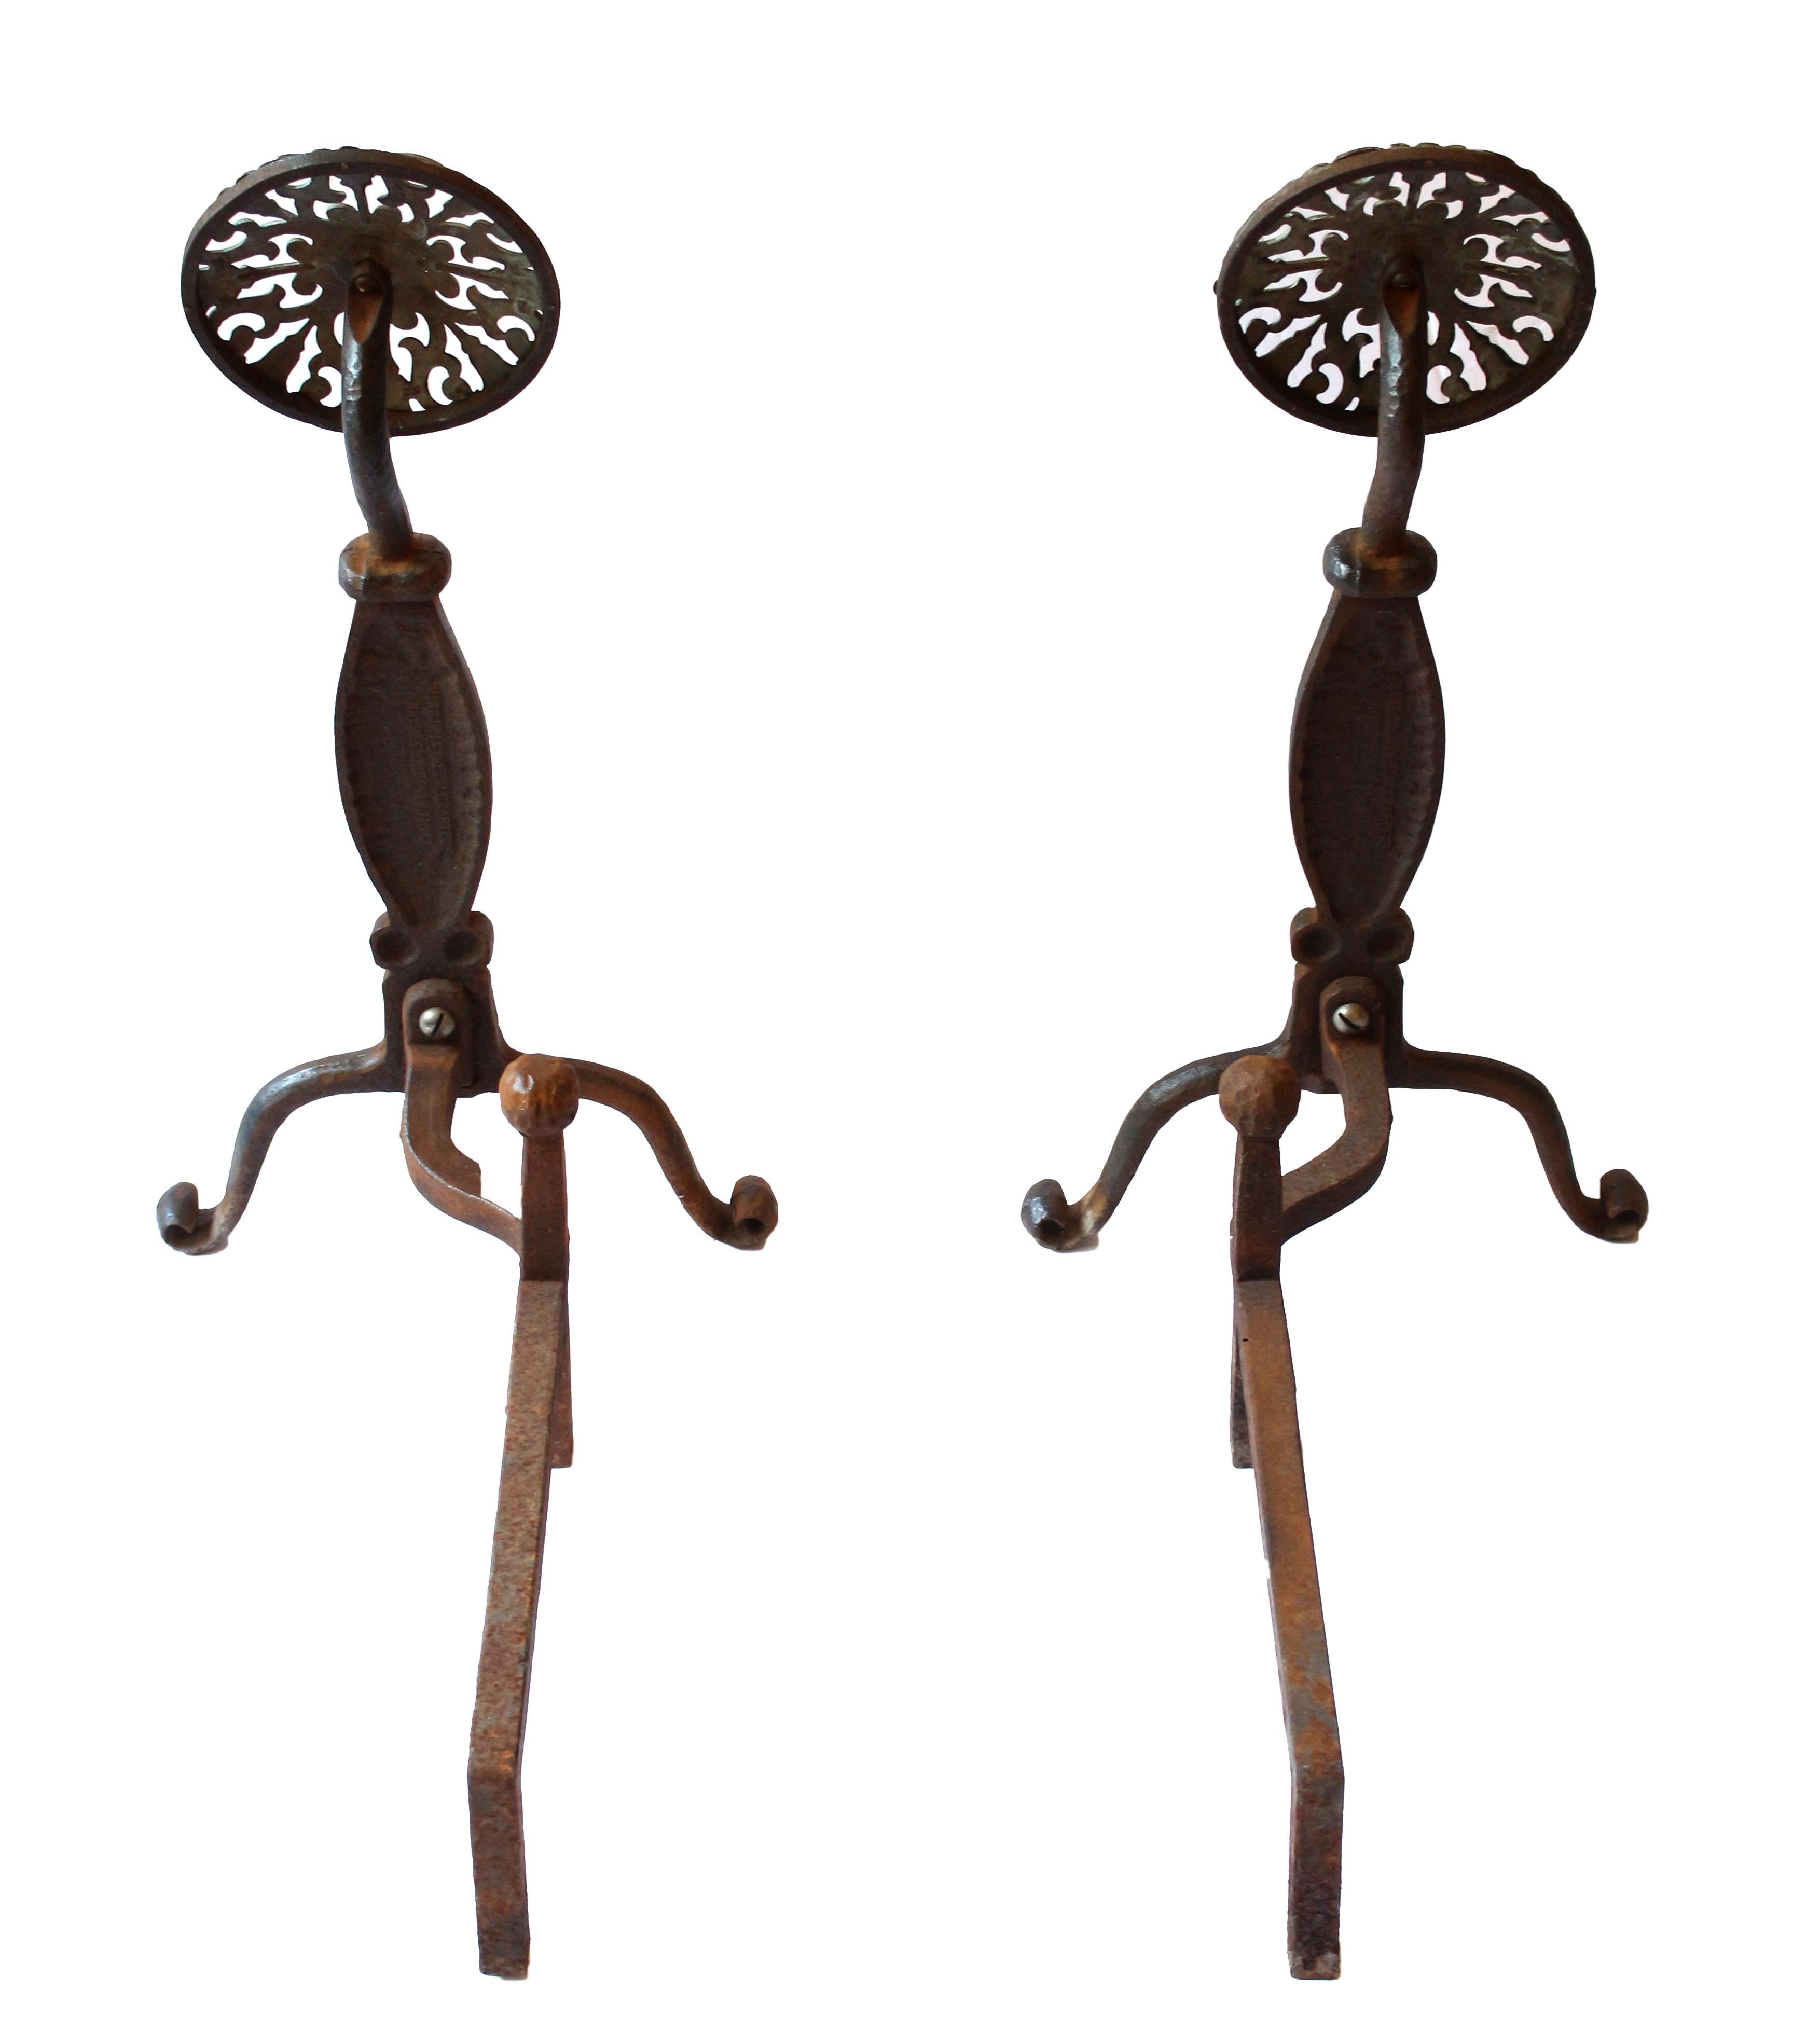 Pair of Iron & Brass Fireplace Andirons by Virginia Metalcrafters, USA, circa 1950s. Italianate design with tulip motif brass panels on forged iron, raised on scrolled feet. Wisp of leaf motif on throat of shafts. Made in their Waynesboro, VA